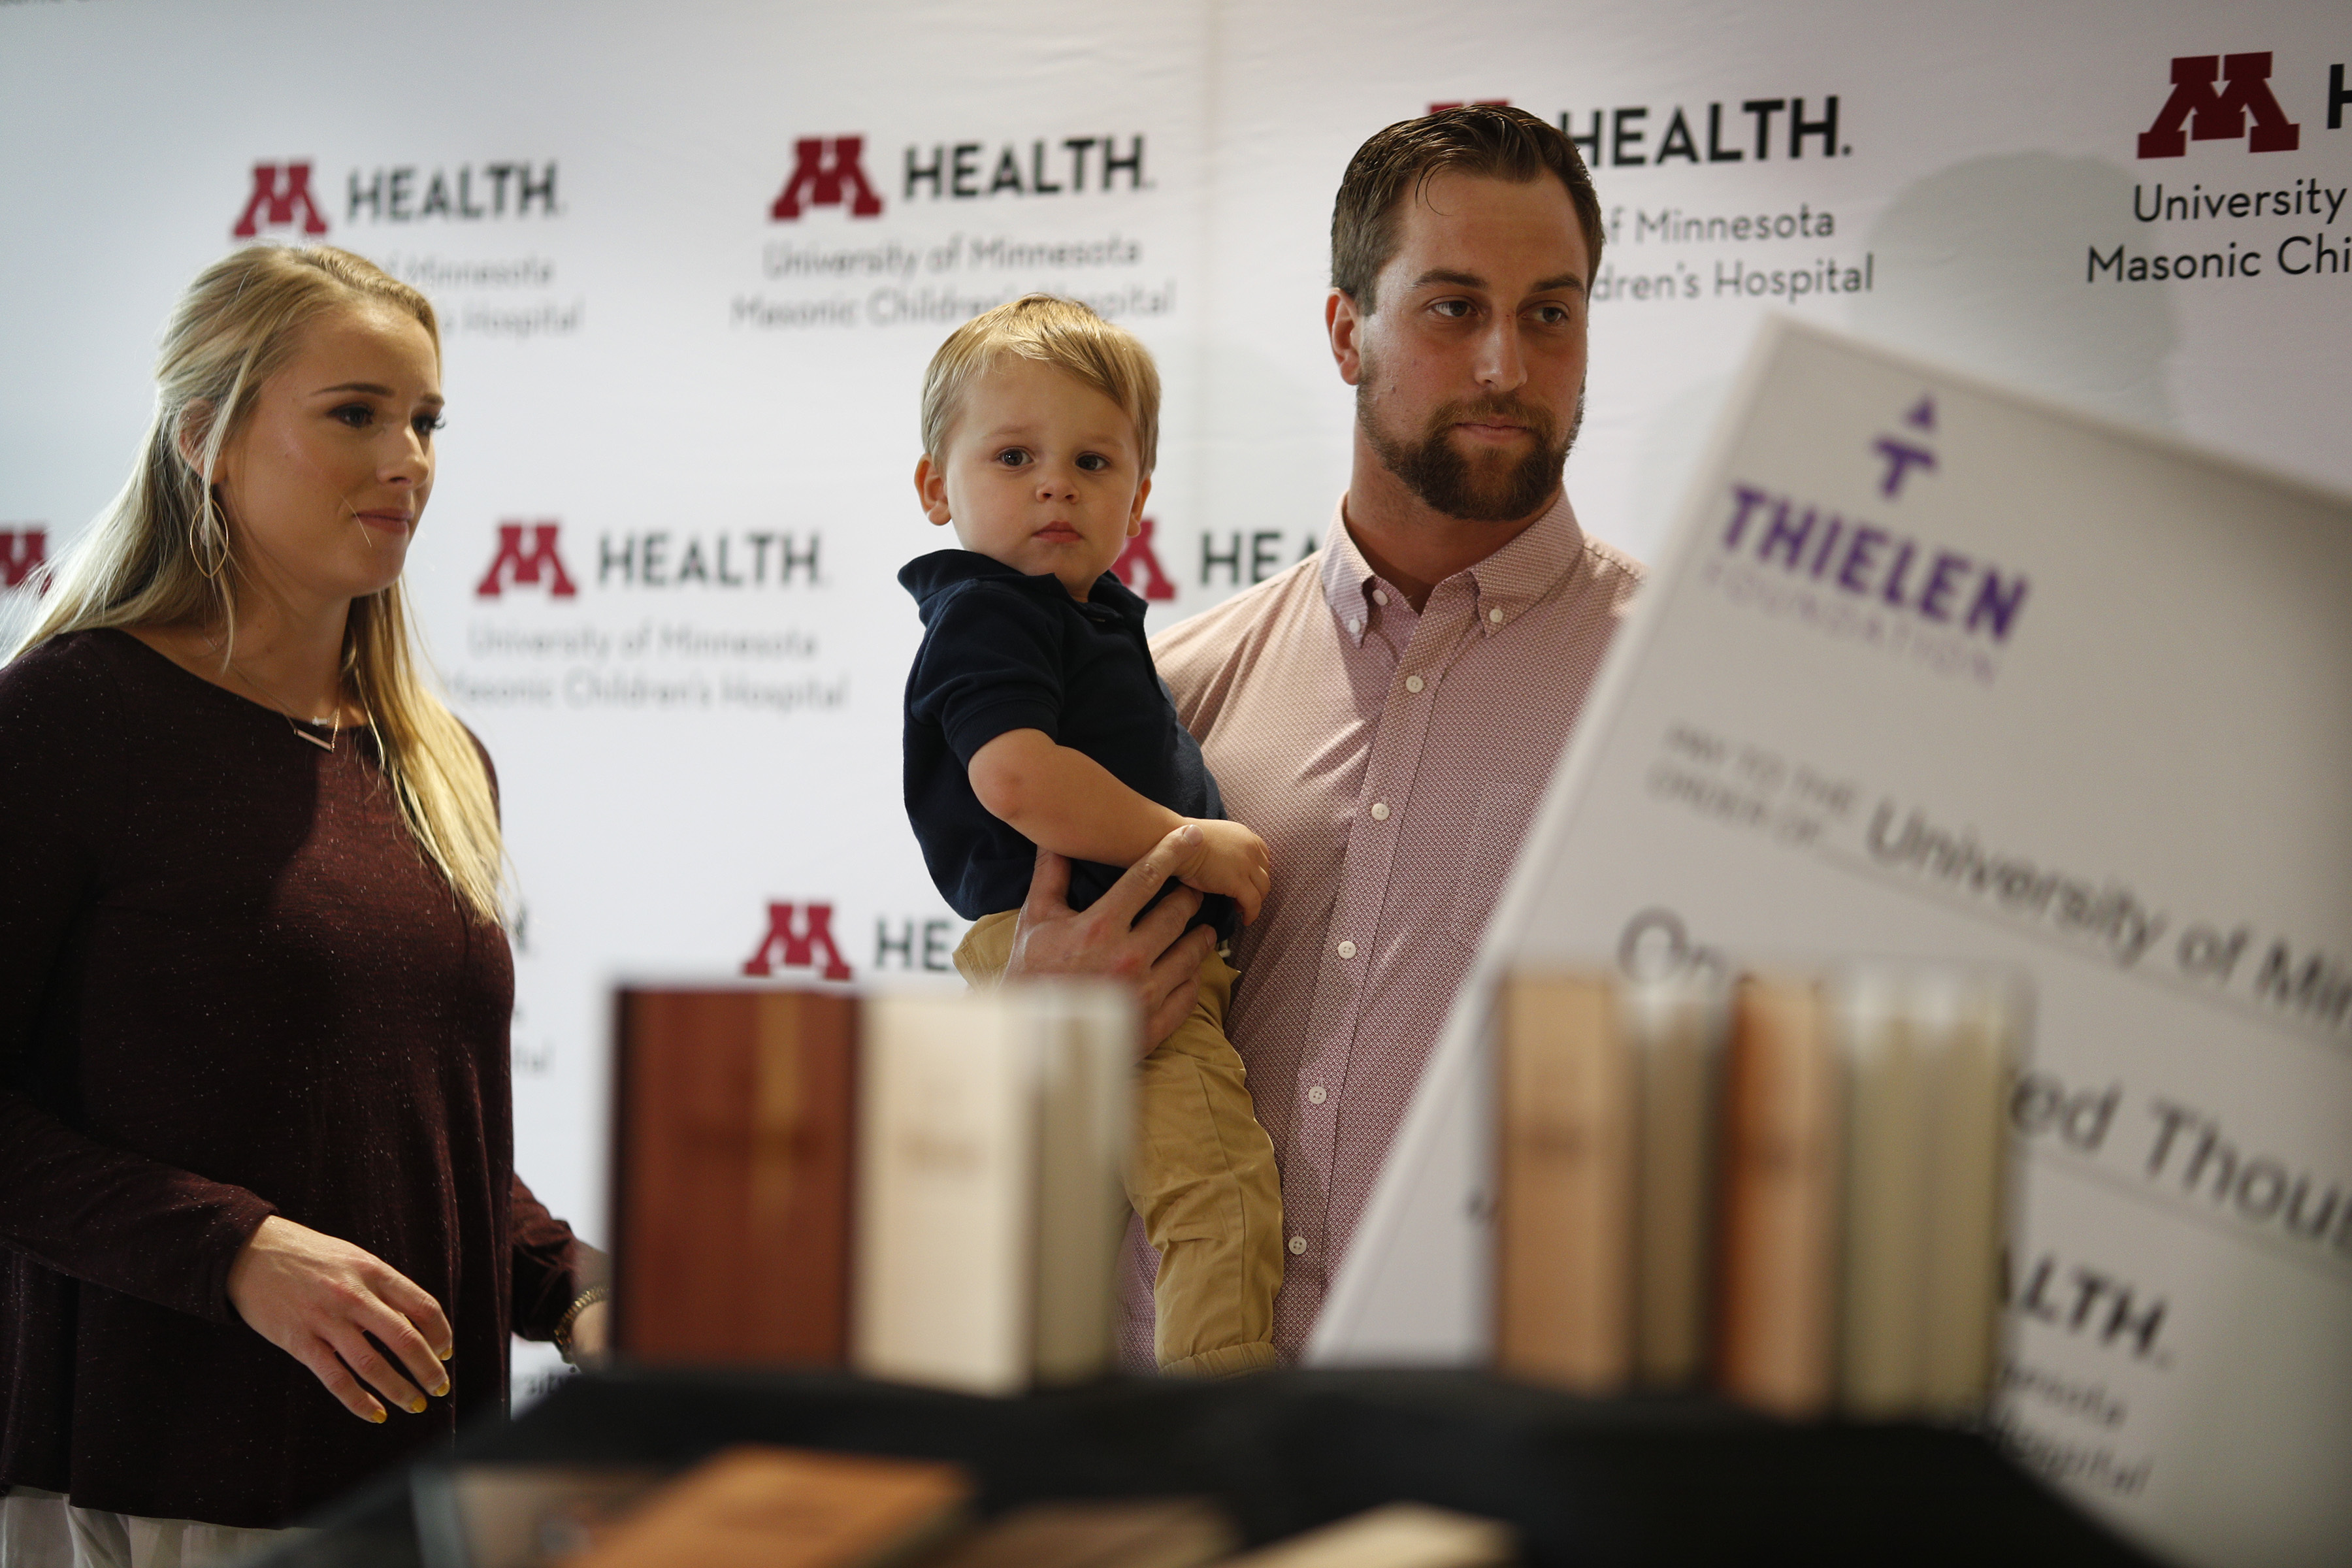 Adam, Caitlin and Asher Thielen, announced that they would be starting the Thielen Foundation partnering with the U of M Masonic Children's Hospital on Tuesday, September 18, 2018, in Minneapolis | Source: Getty Images